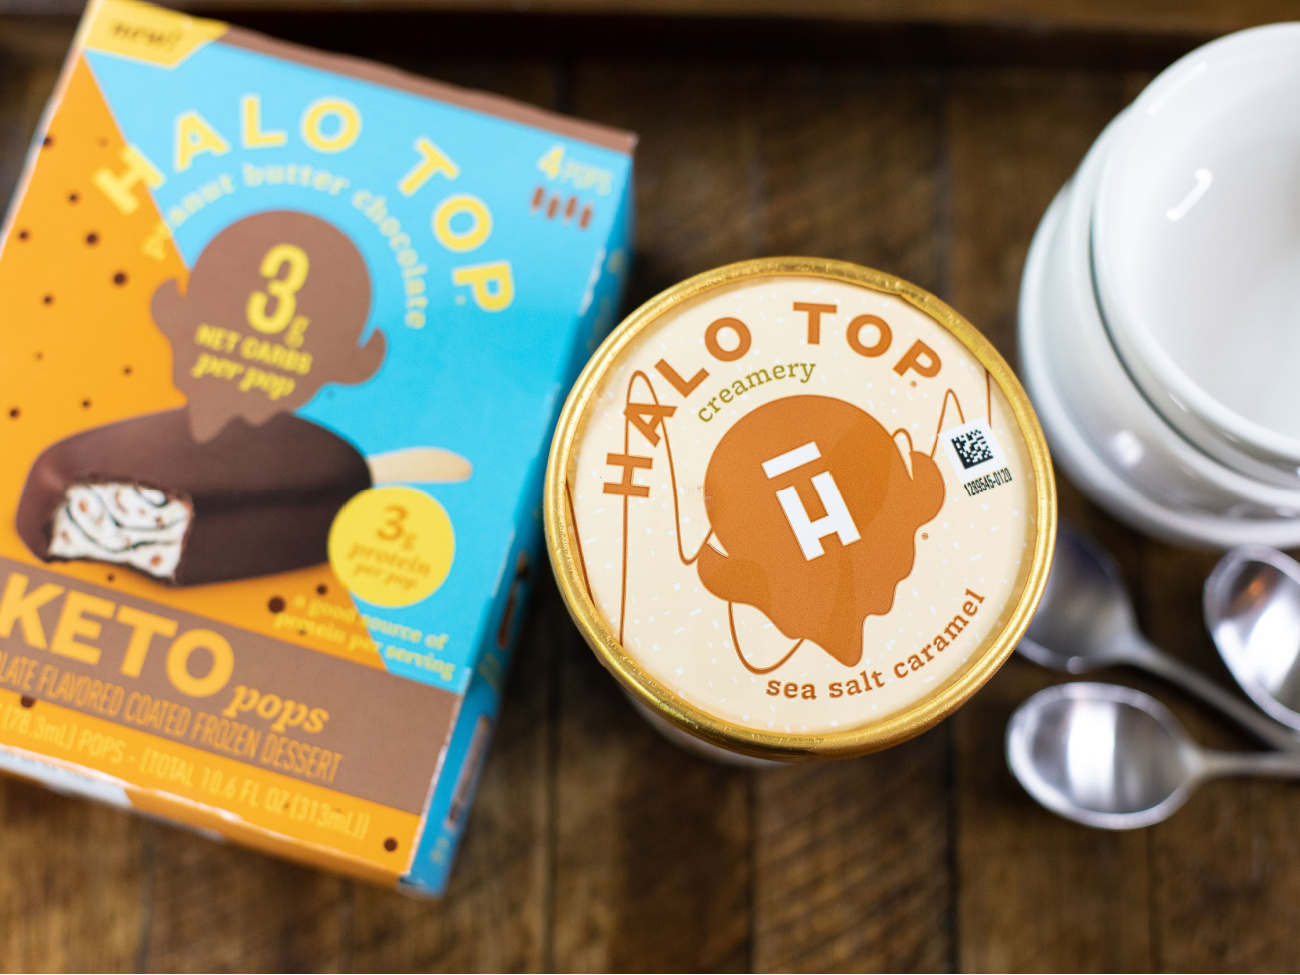 New High Value Halo Top Ibotta Offer – Get A Pint For As Low As $3.75 At Publix